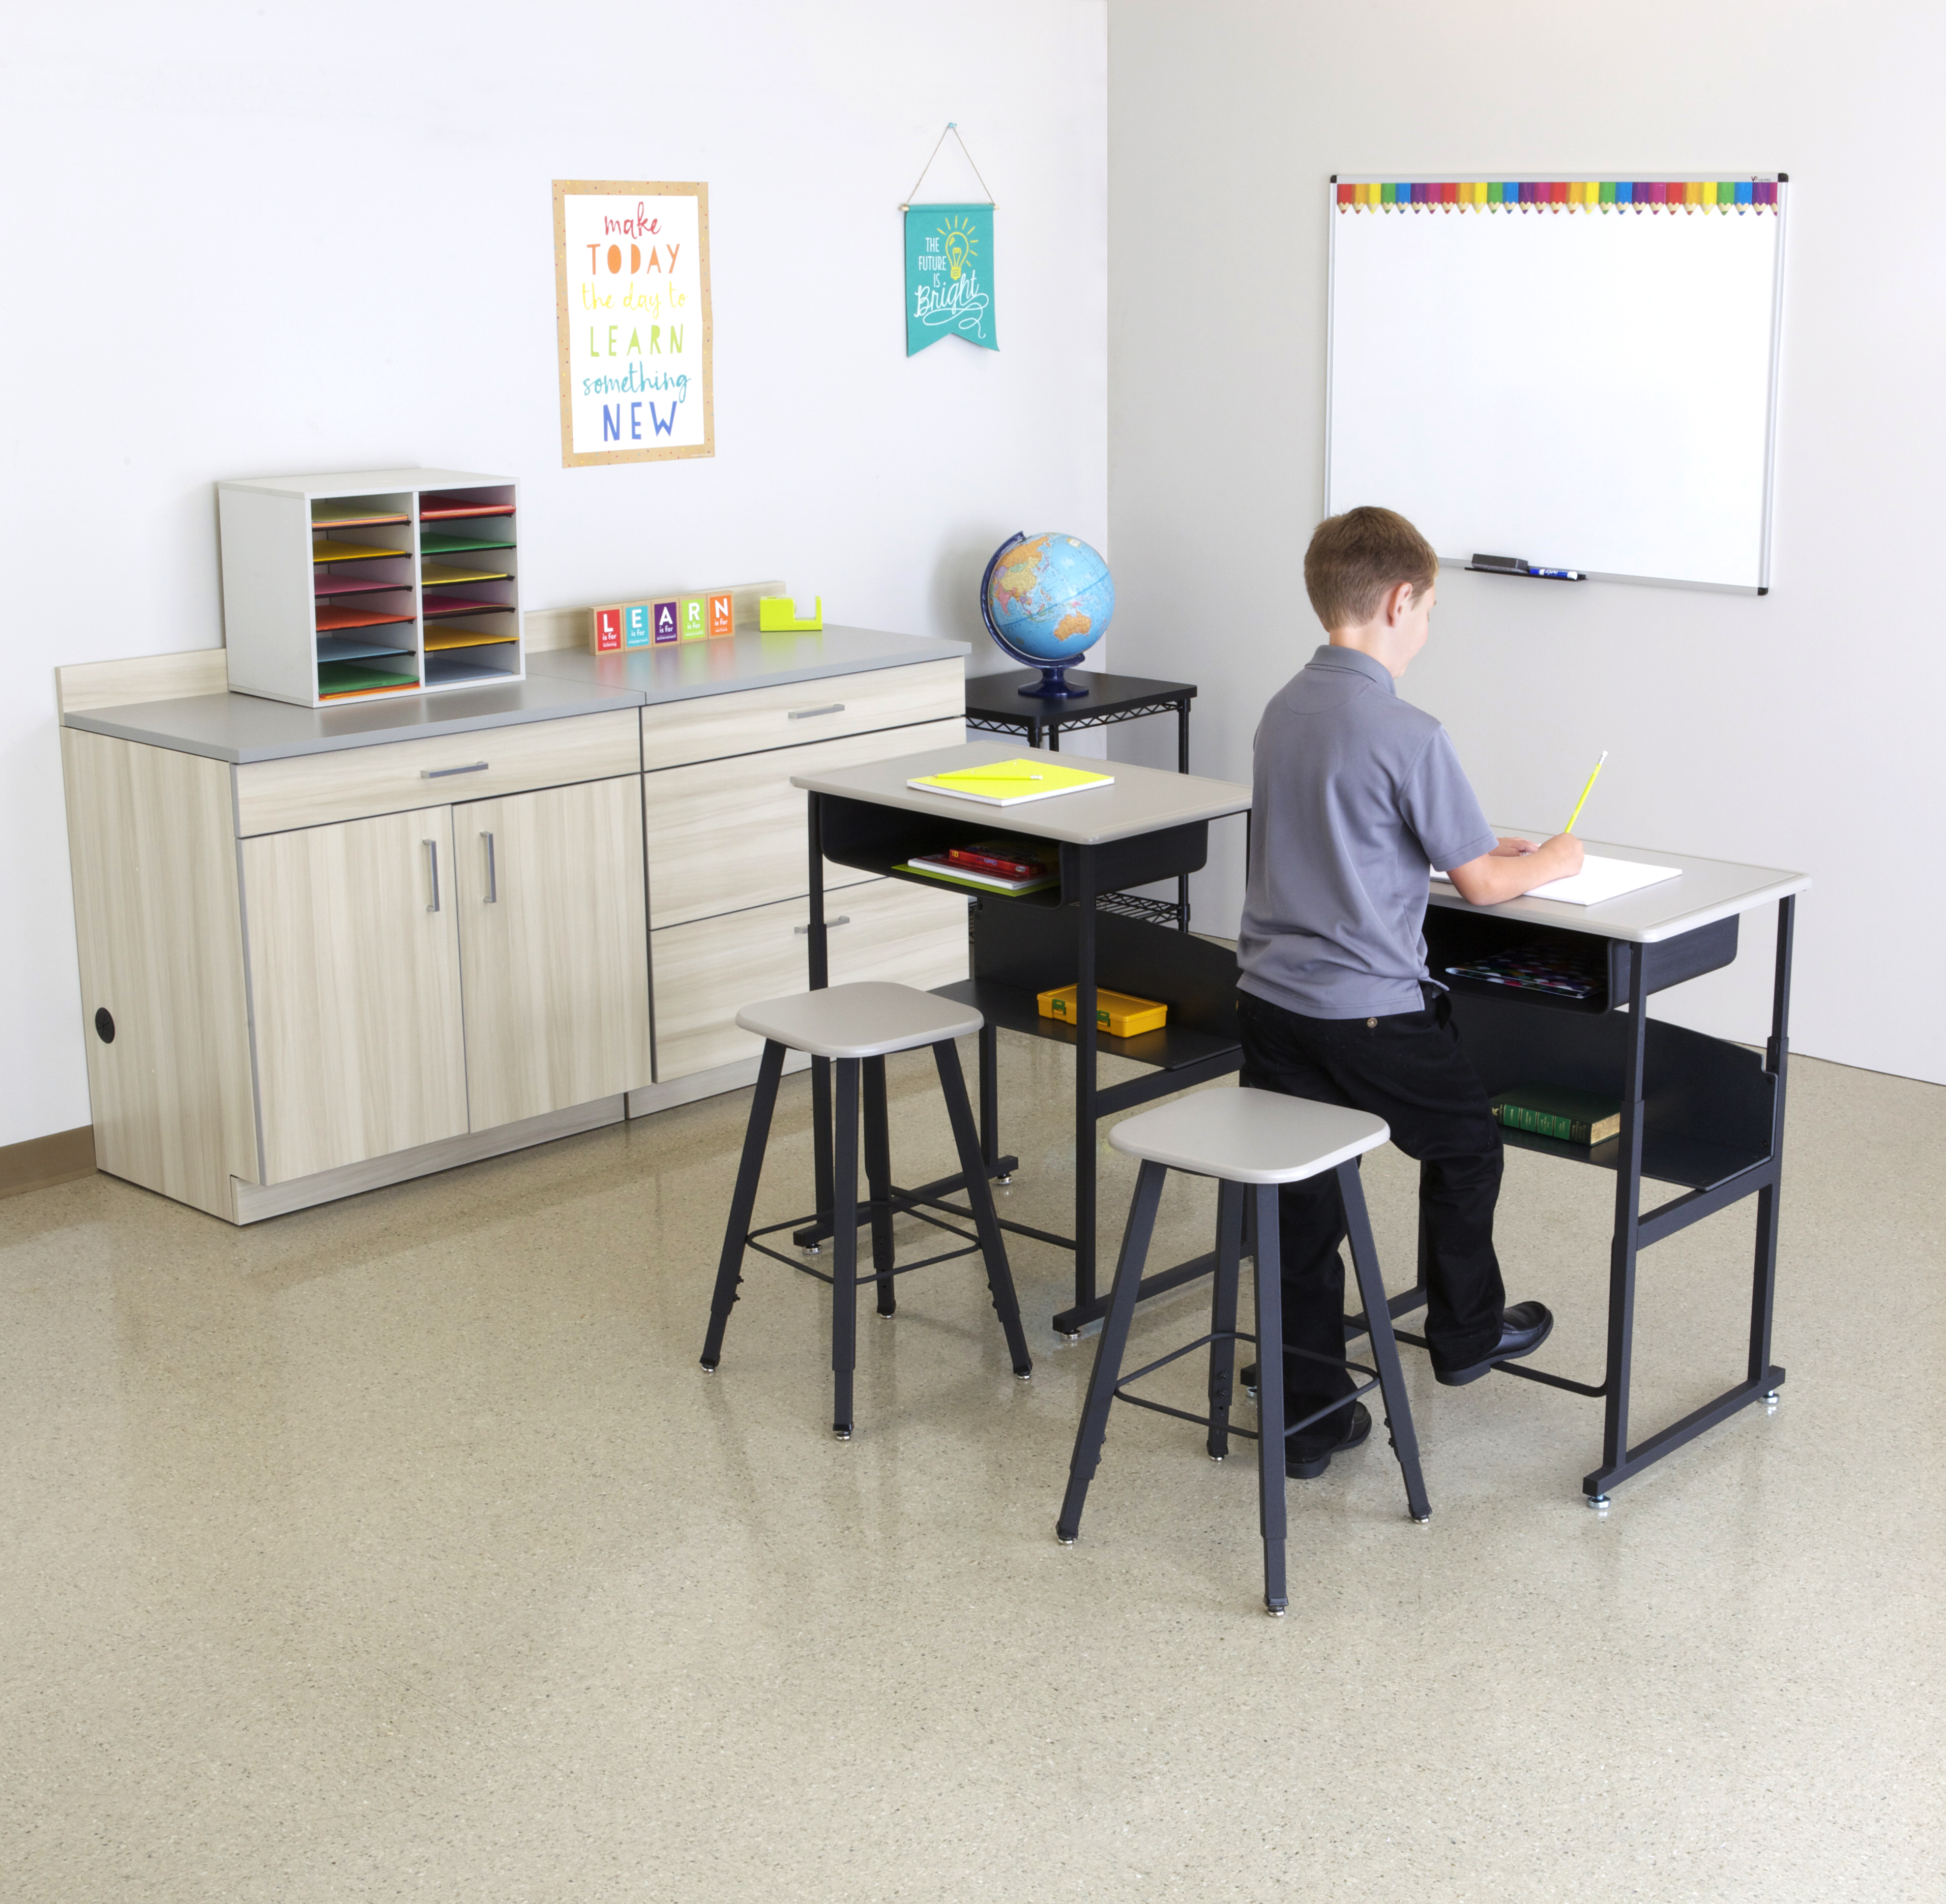 AlphaBetter® Adjustable-Height Student Stool with Thermoplastic